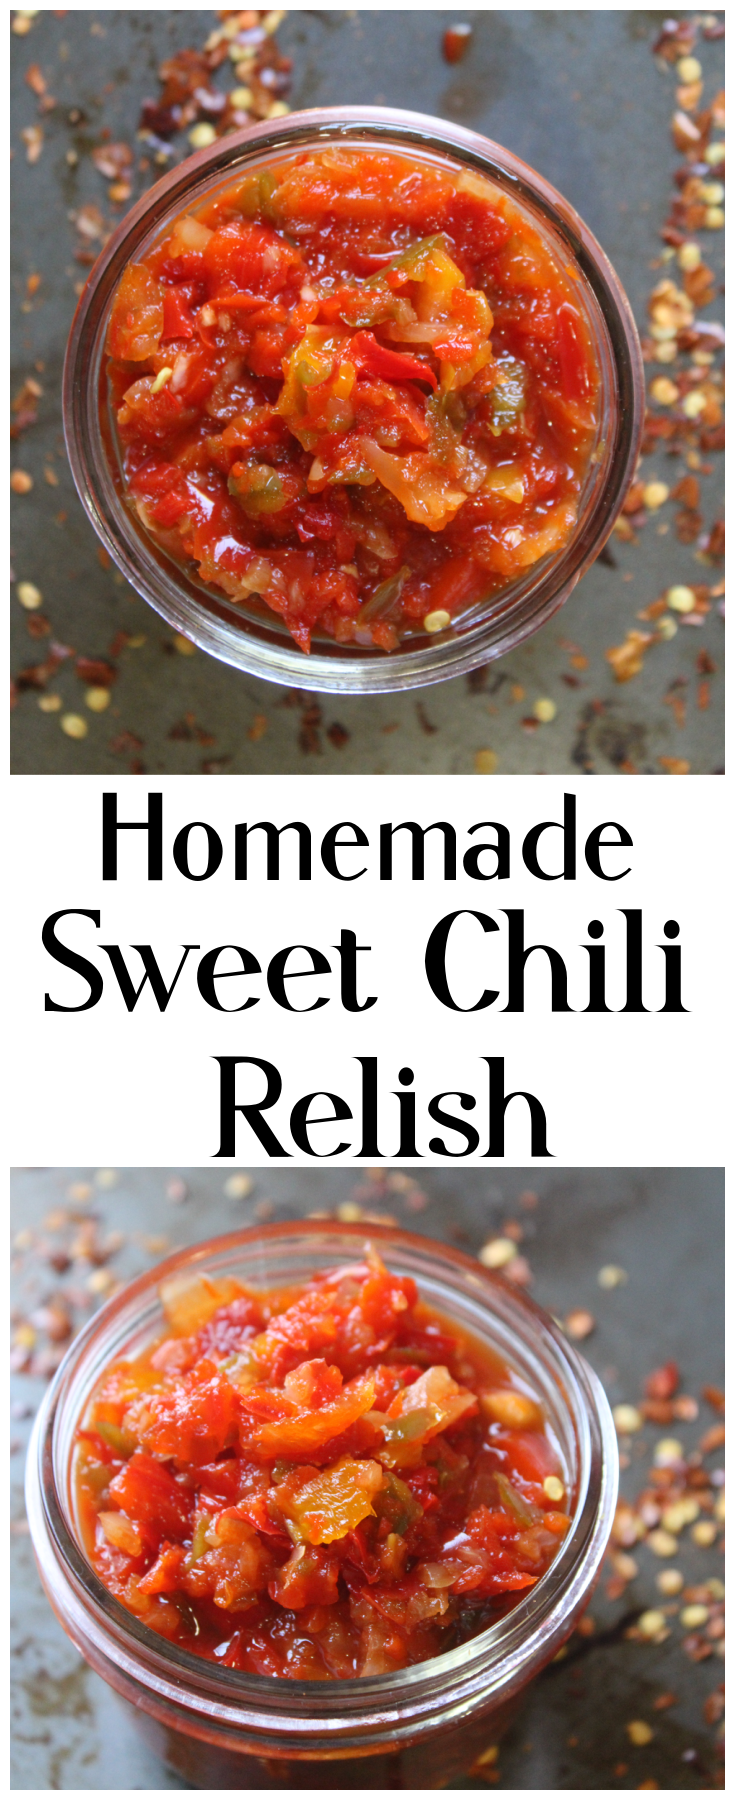 This delicious homemade sweet chili pepper relish is sweet with heat - great for any charcuterie board, burger, or brat.  It's the best way to use a garden bounty of peppers!